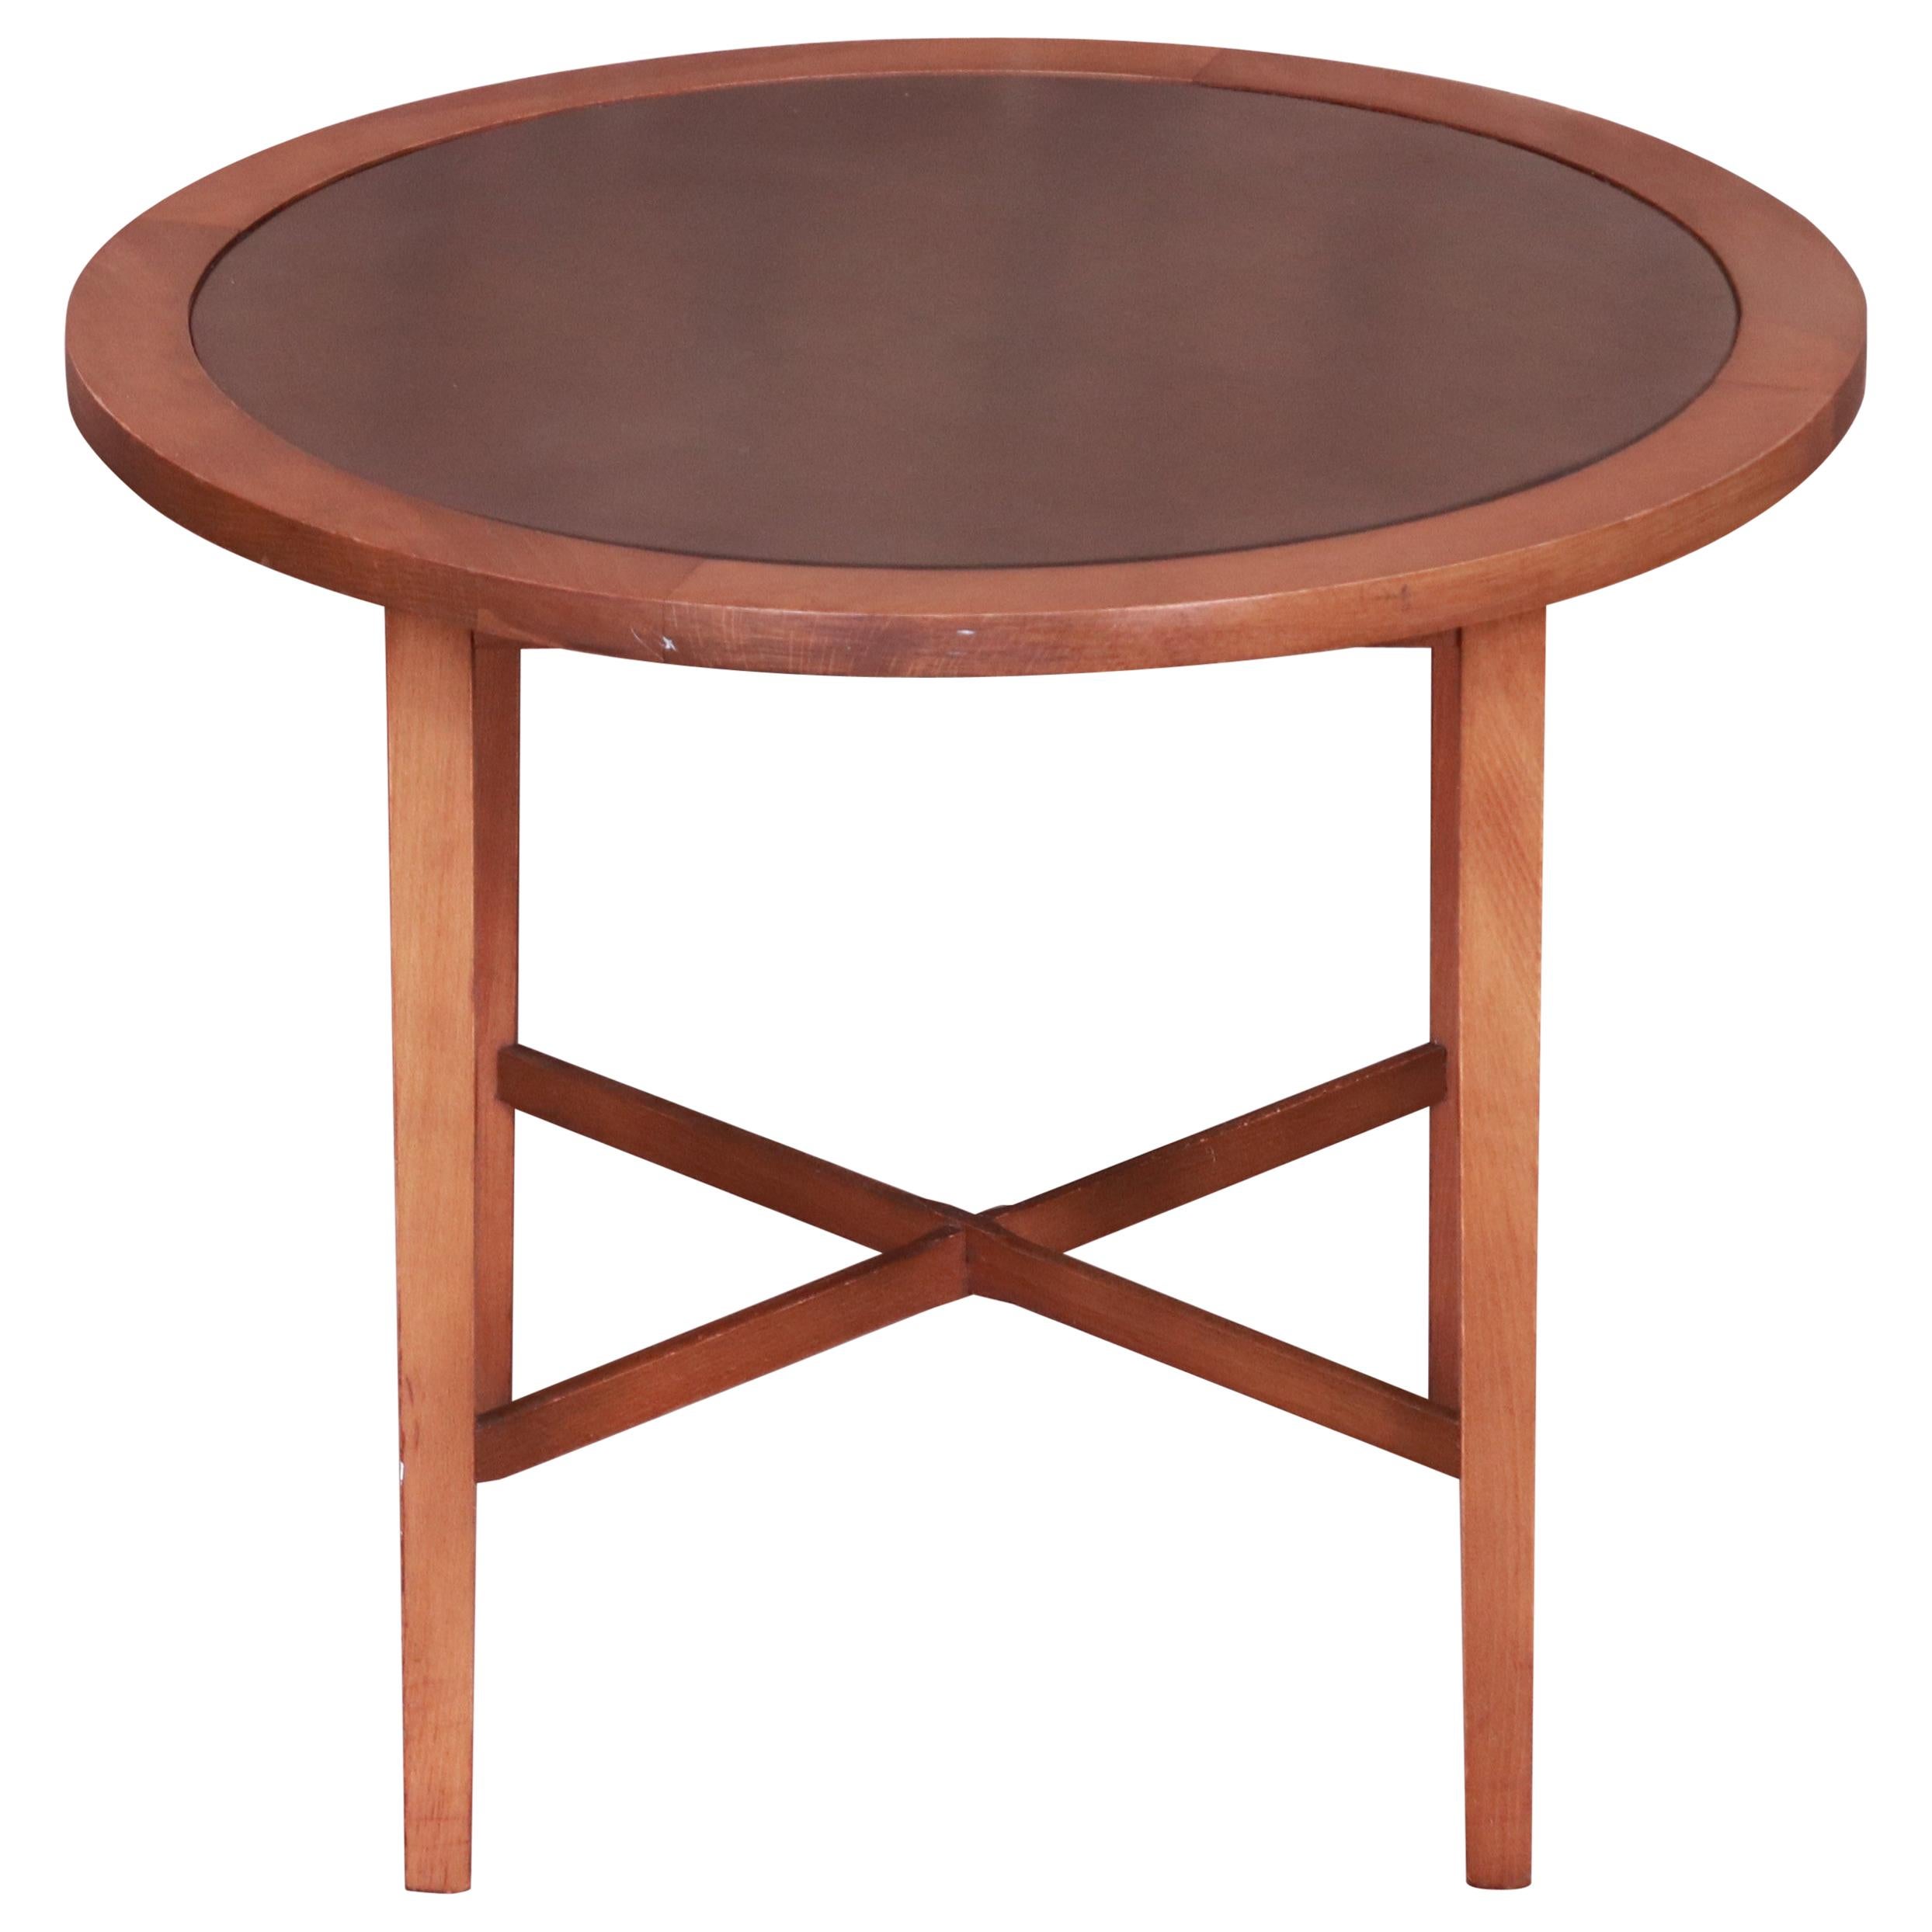 Paul McCobb Perimeter Group Leather Top Occasional Side Table, 1950s